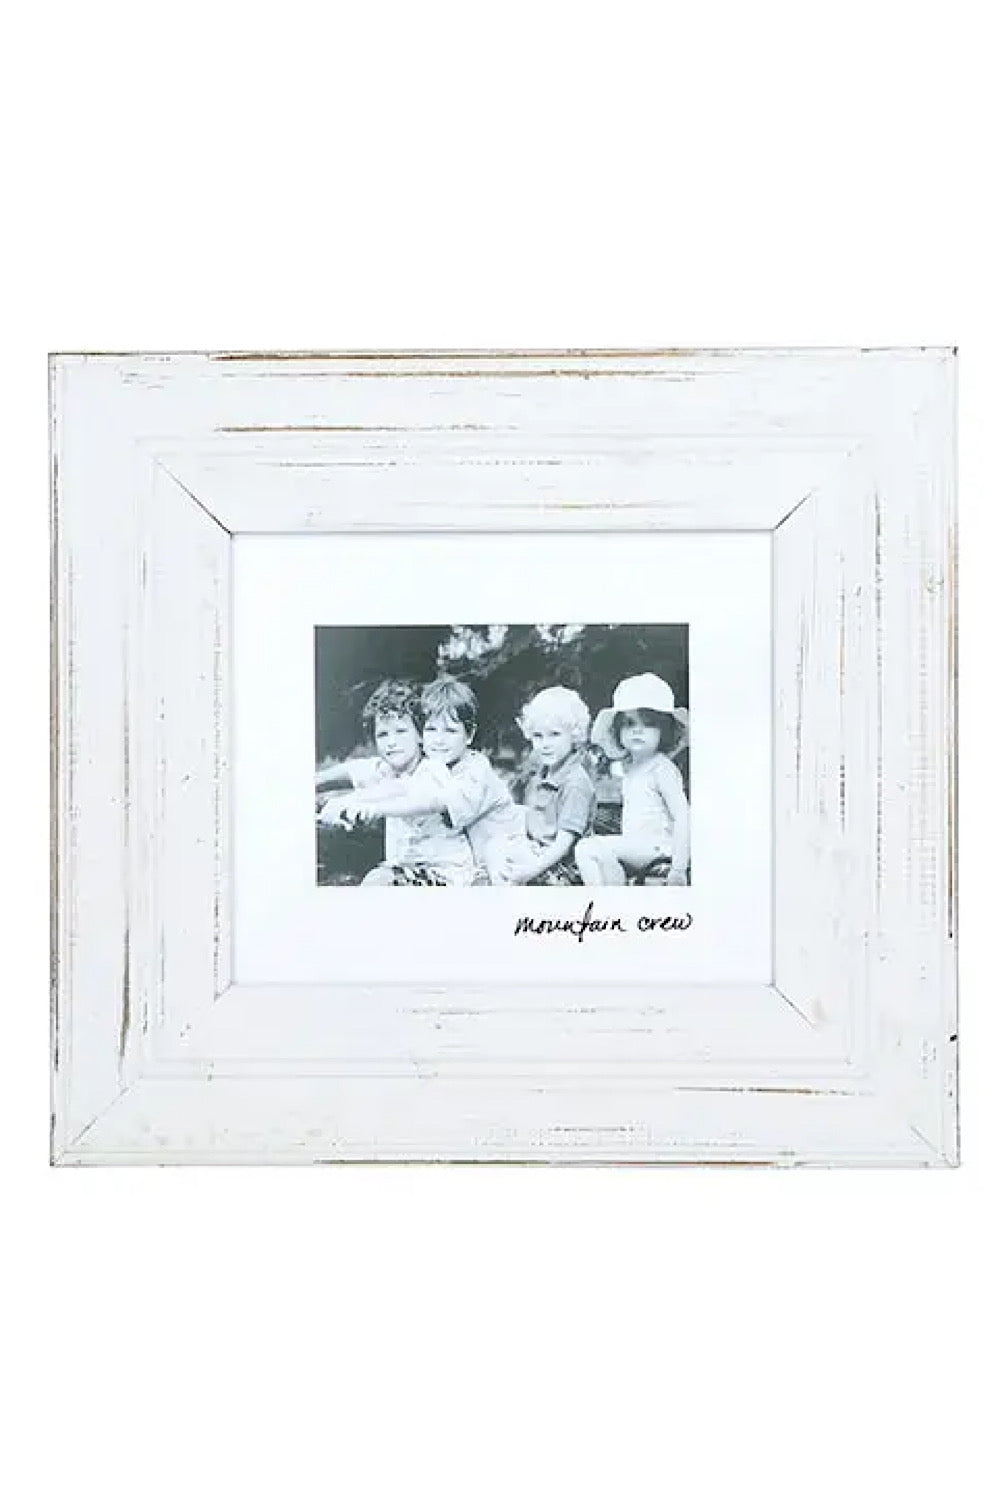 MOUNTAIN CREW PICTURE FRAME